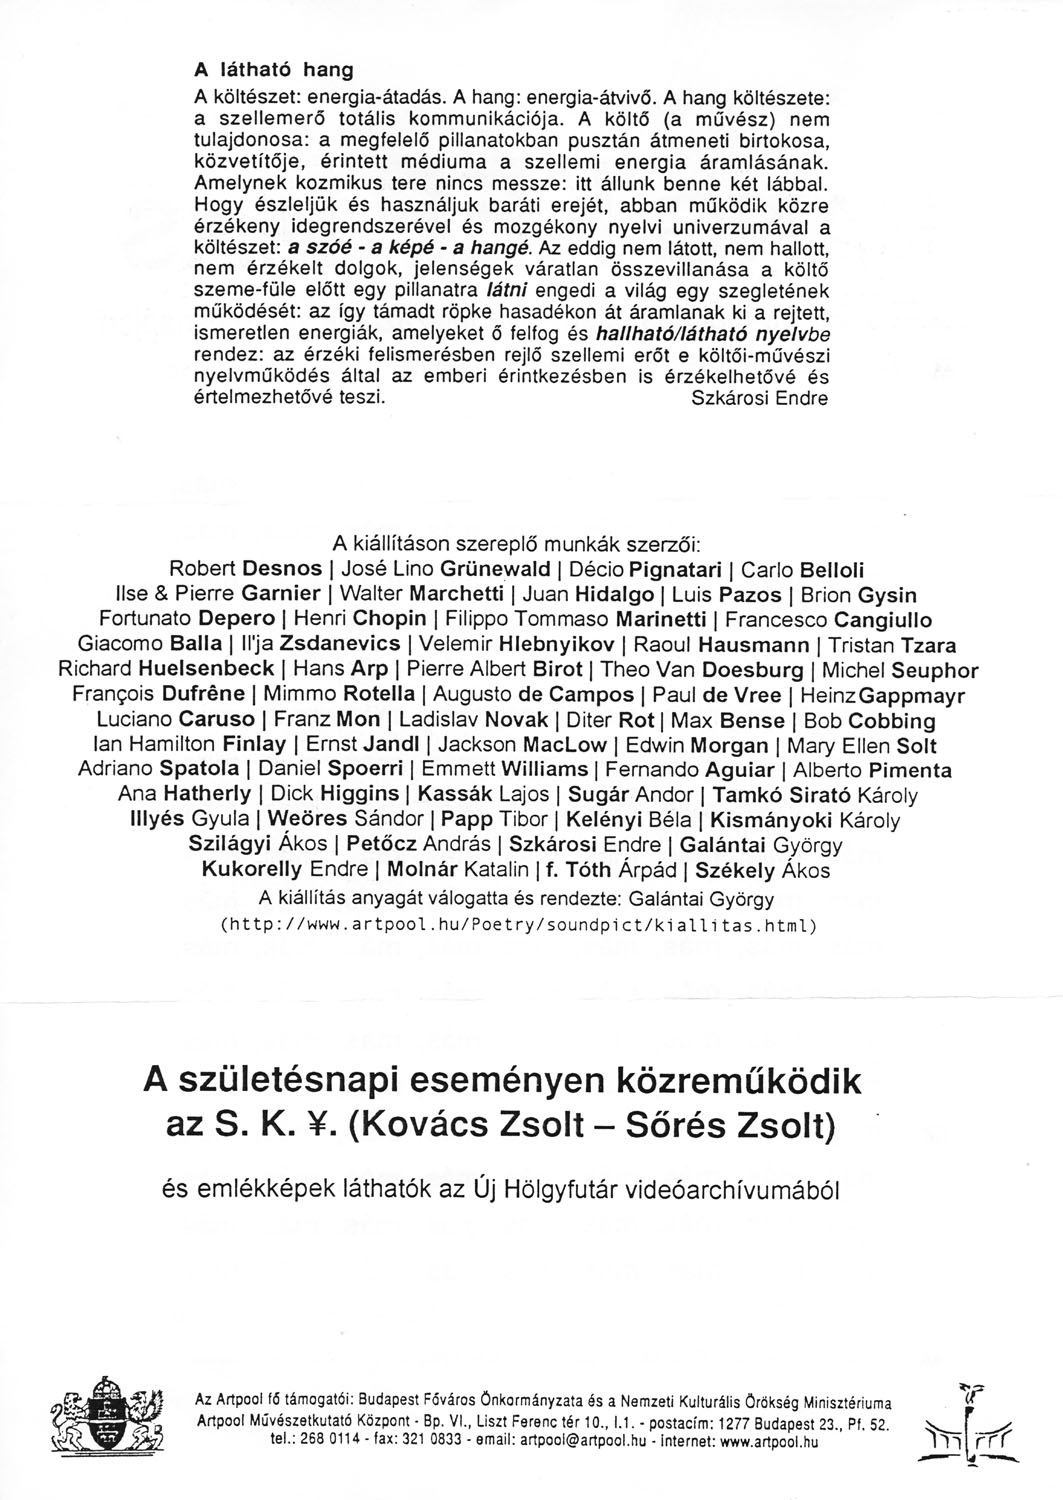 Invitation  for the exhibition HANG KÉP MÁS / SOUND IMAGE POETRY, Artpool P60, Budapest, 2002 (2nd page)